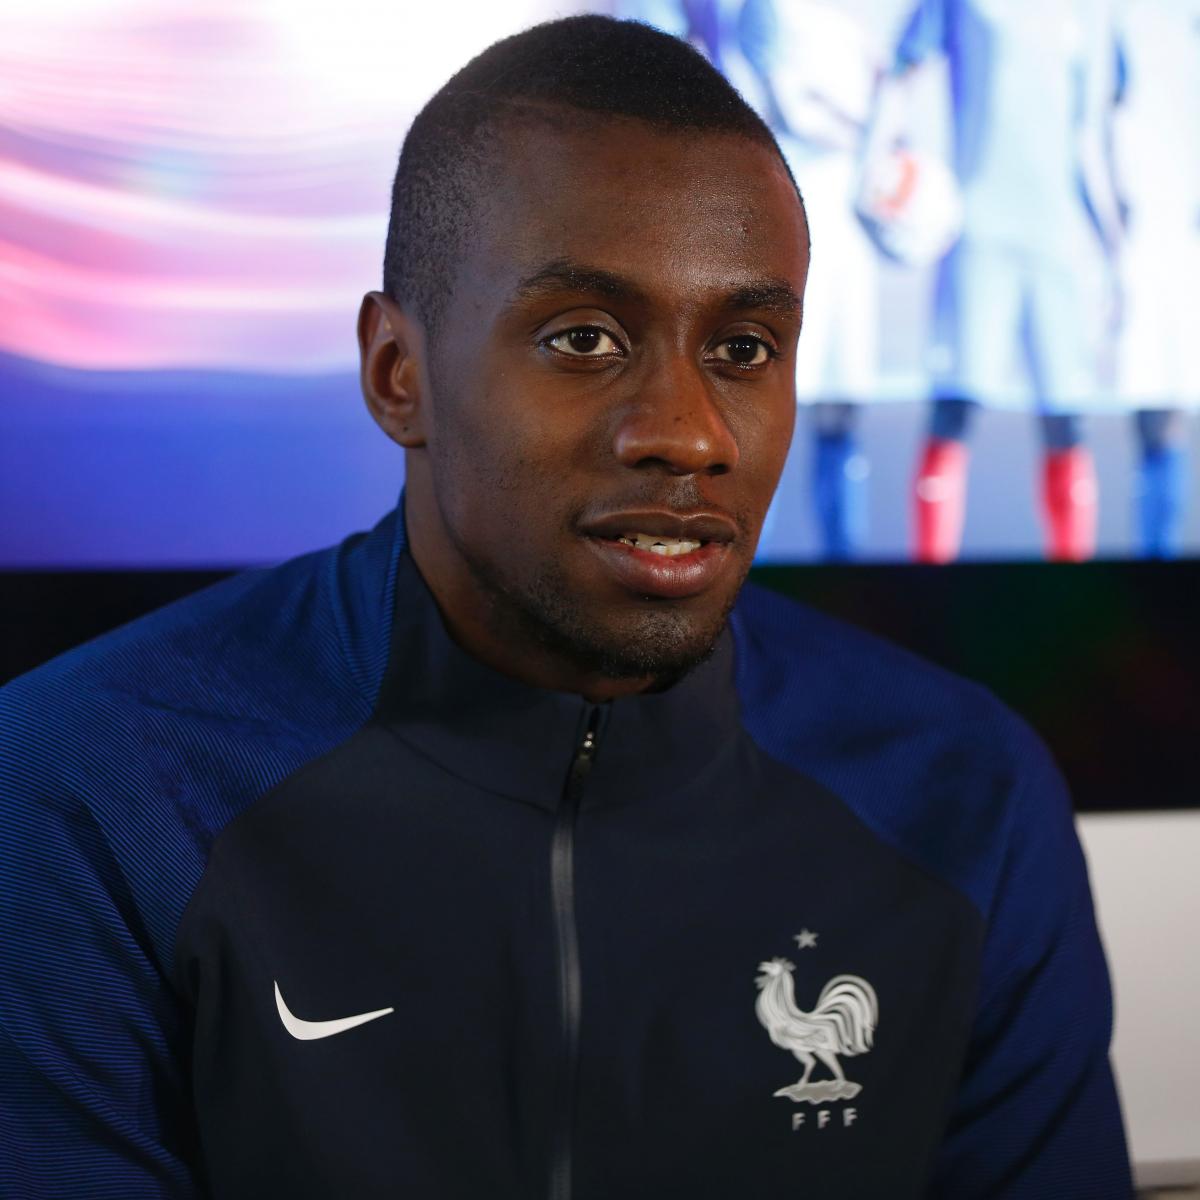 Blaise Matuidi Transfers to Juventus from PSG, Agrees to 3-Year Contract | Bleacher ...1200 x 1200